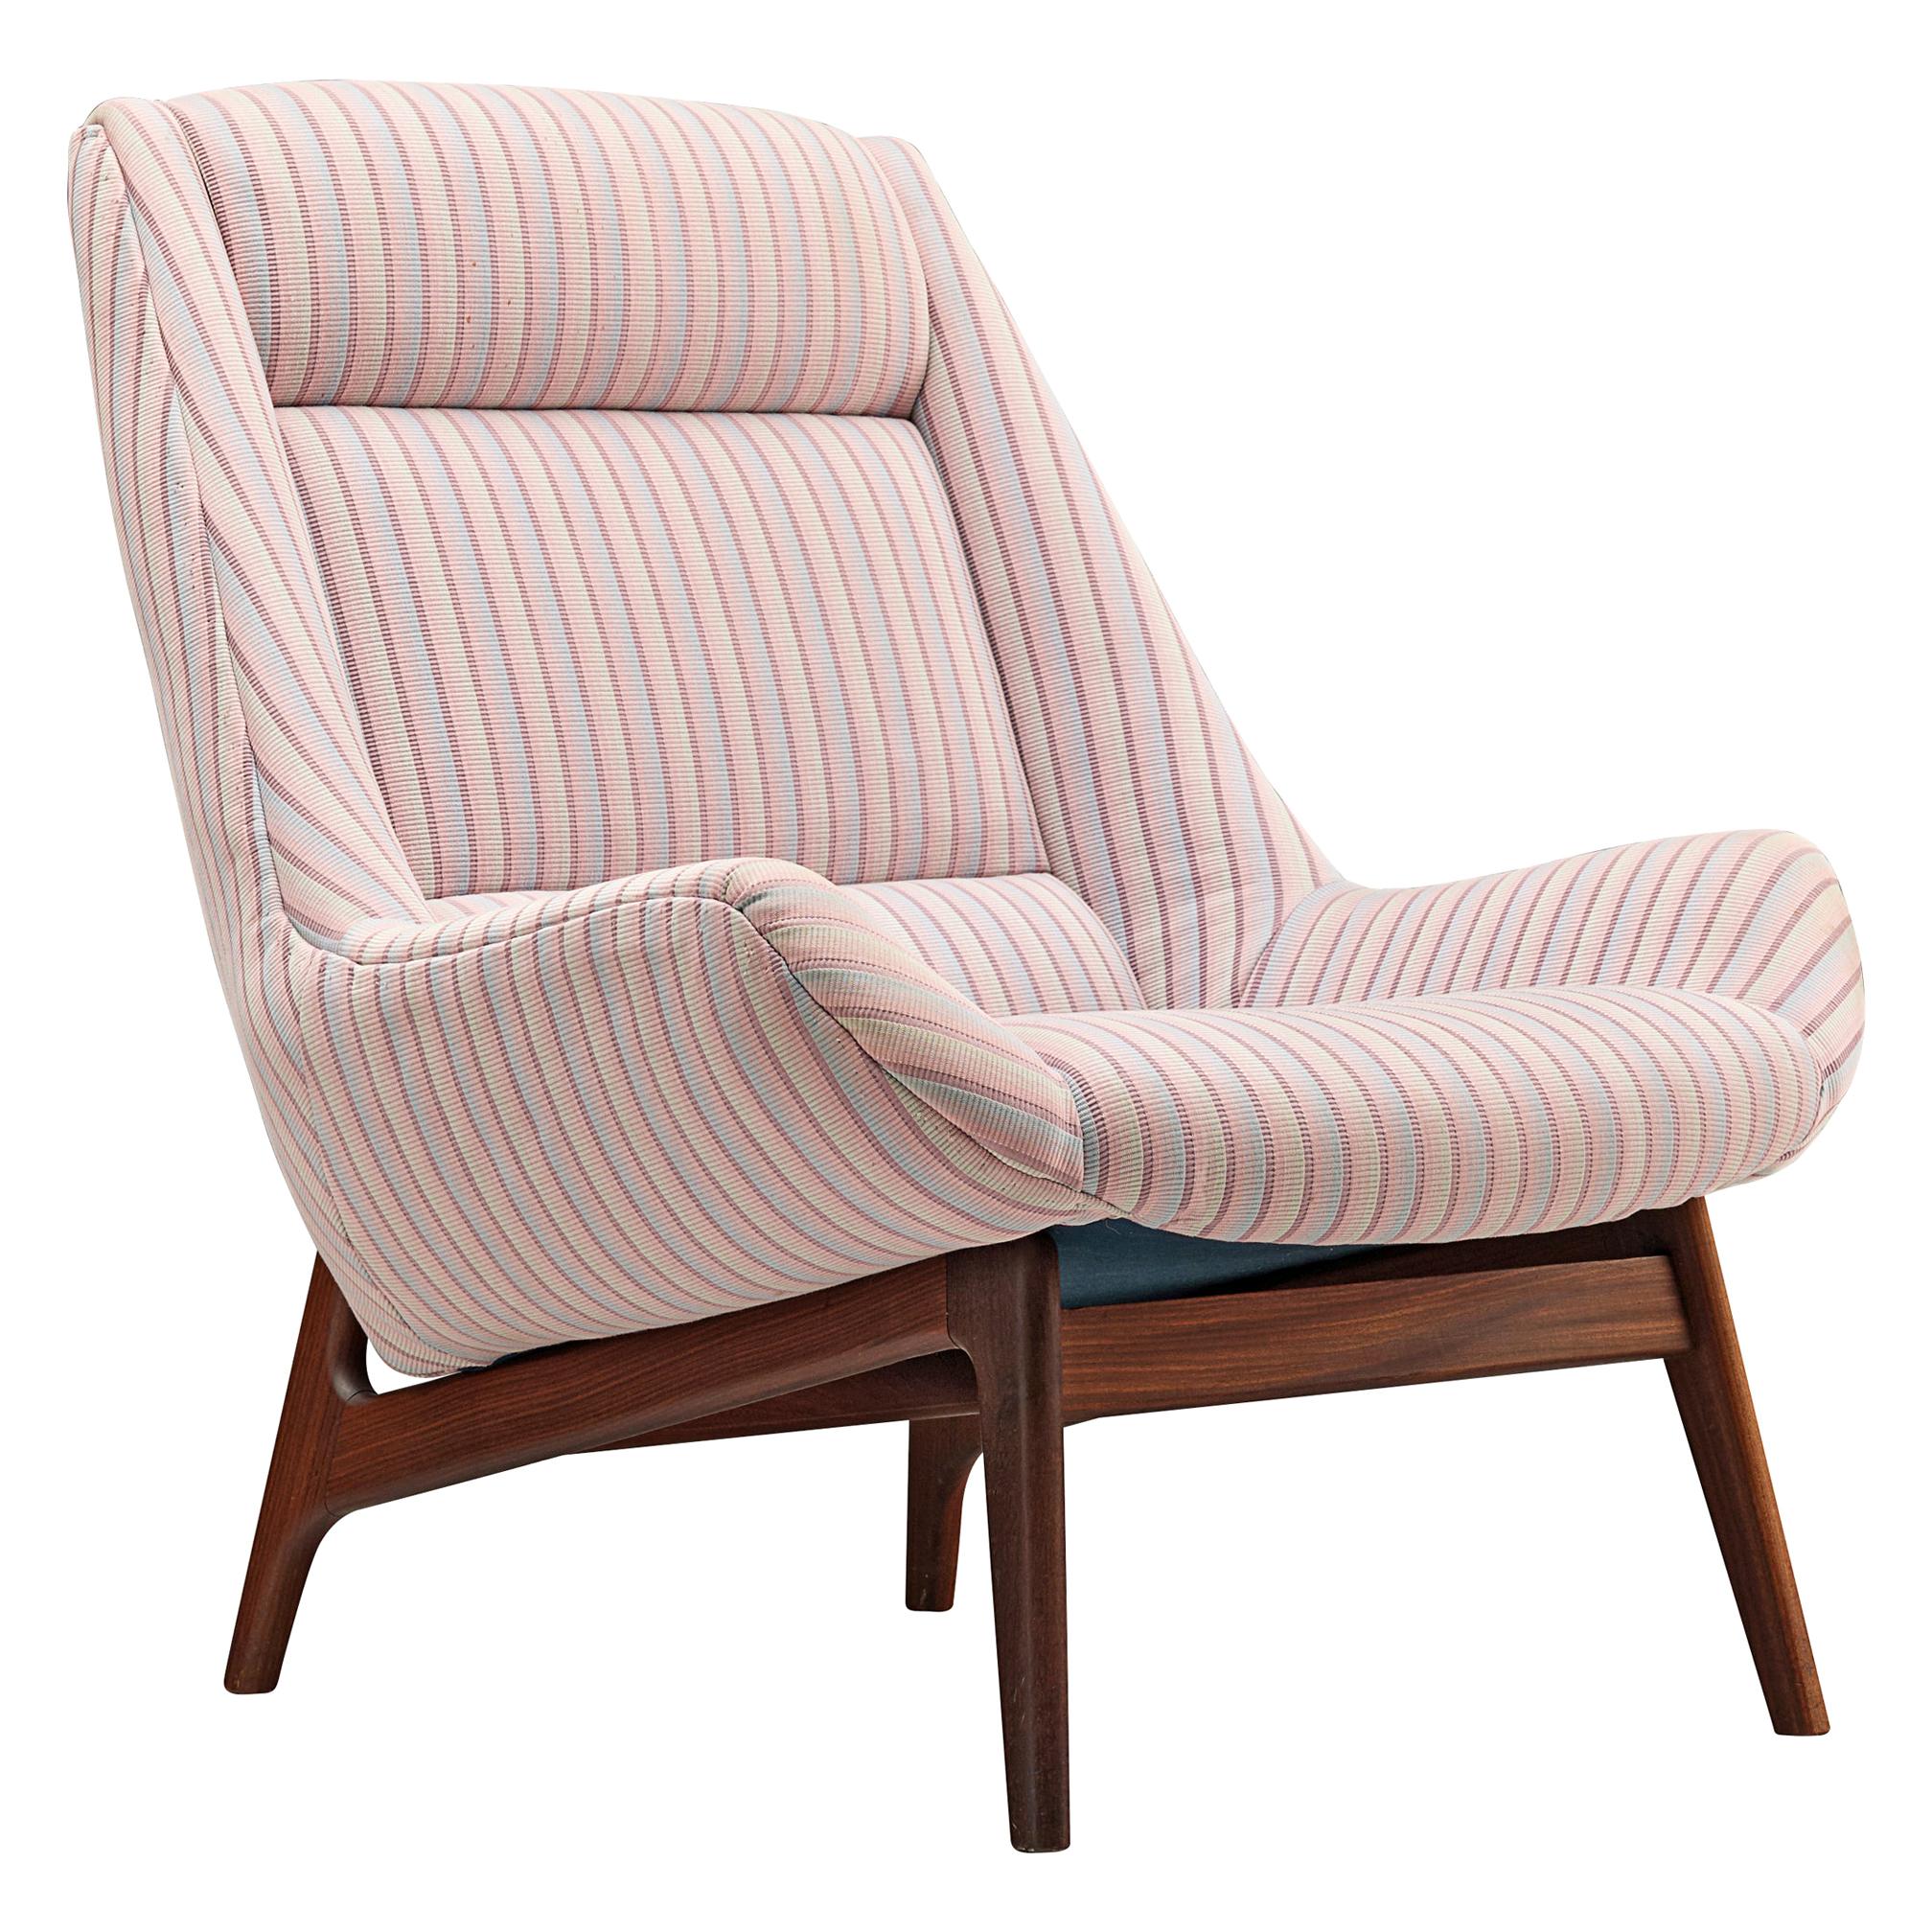 Lounge Chair in Pink Striped Upholstery